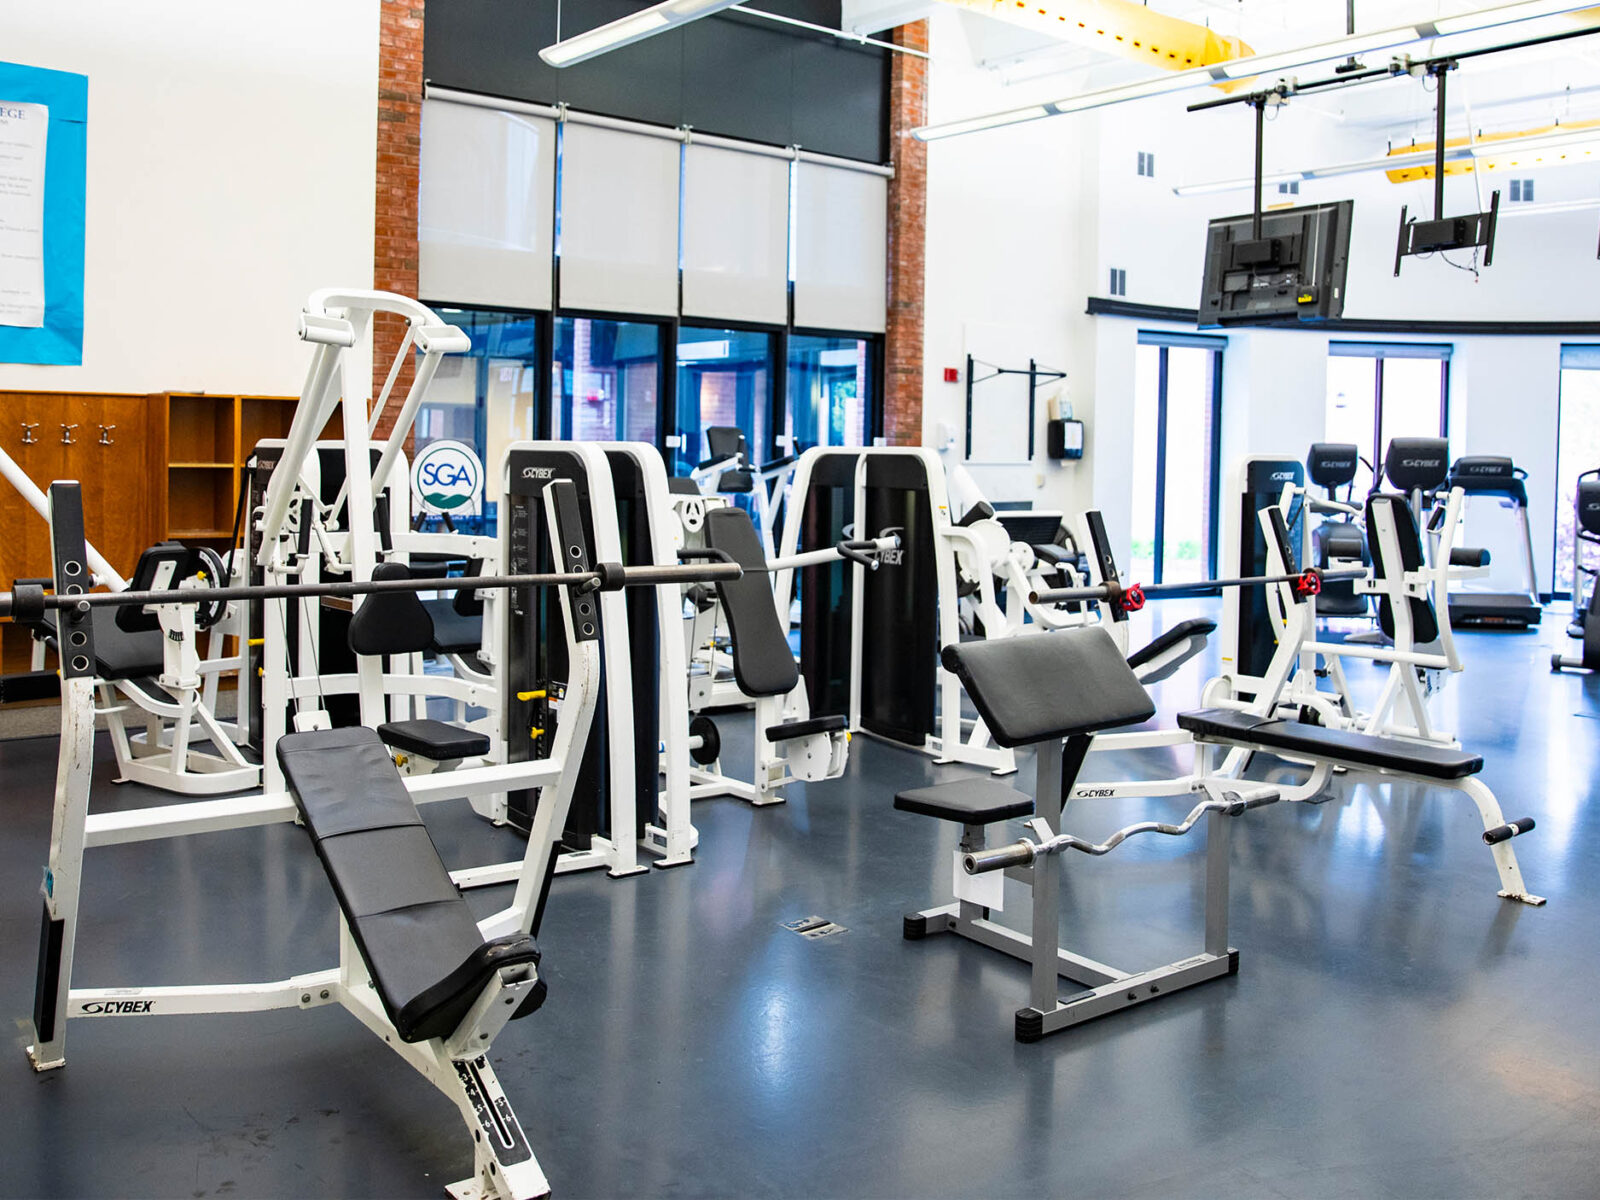 interior shot of the college fitness center